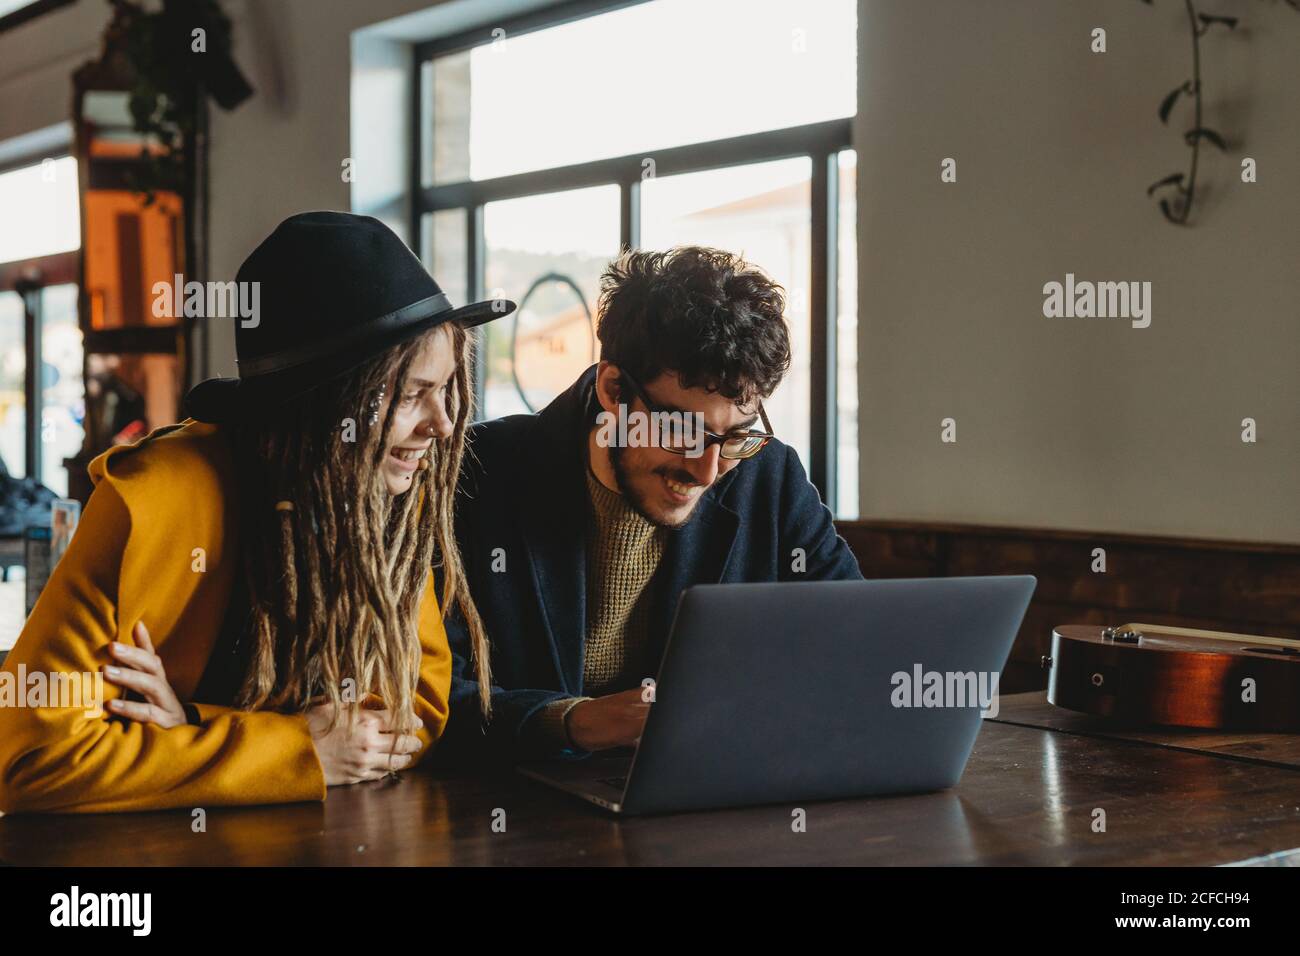 Smart man in glasses and stylish Woman in hat looking at monitor while man typing on laptop in cafe Stock Photo